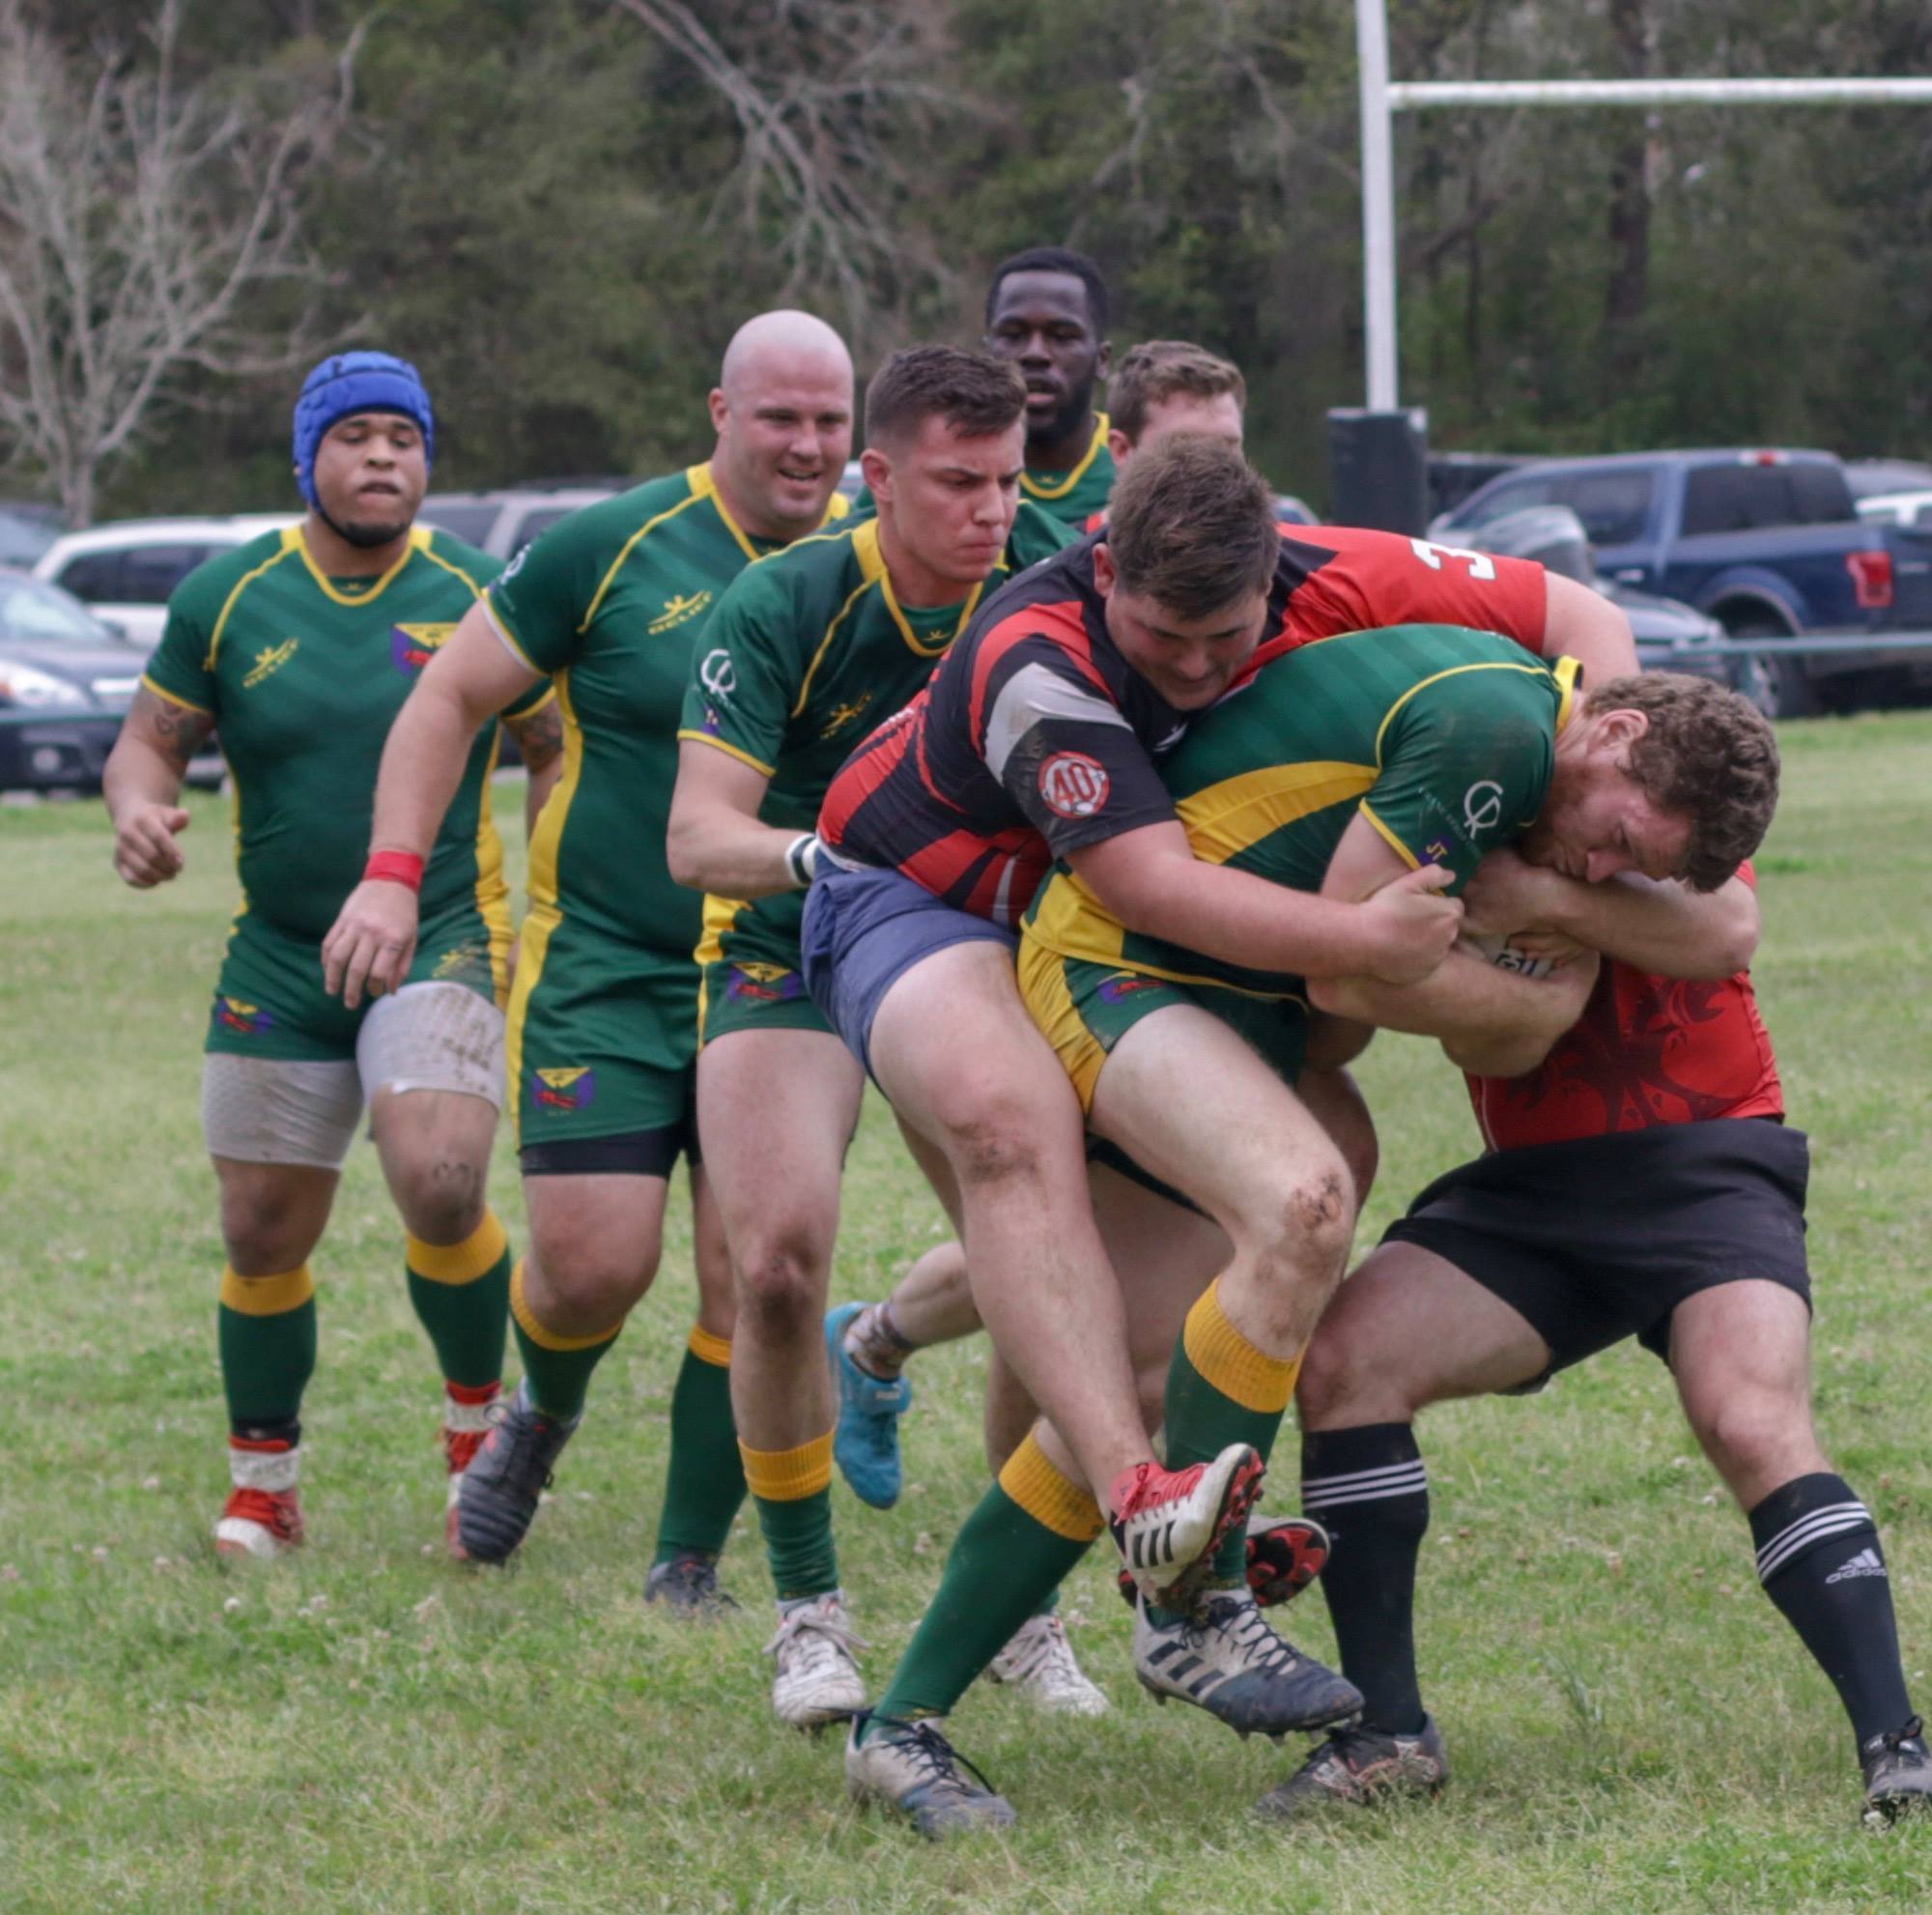 Credit: New Orleans RFC, March’s Second Saturday in USA Rugby South Provided Plenty of Action for Everyone